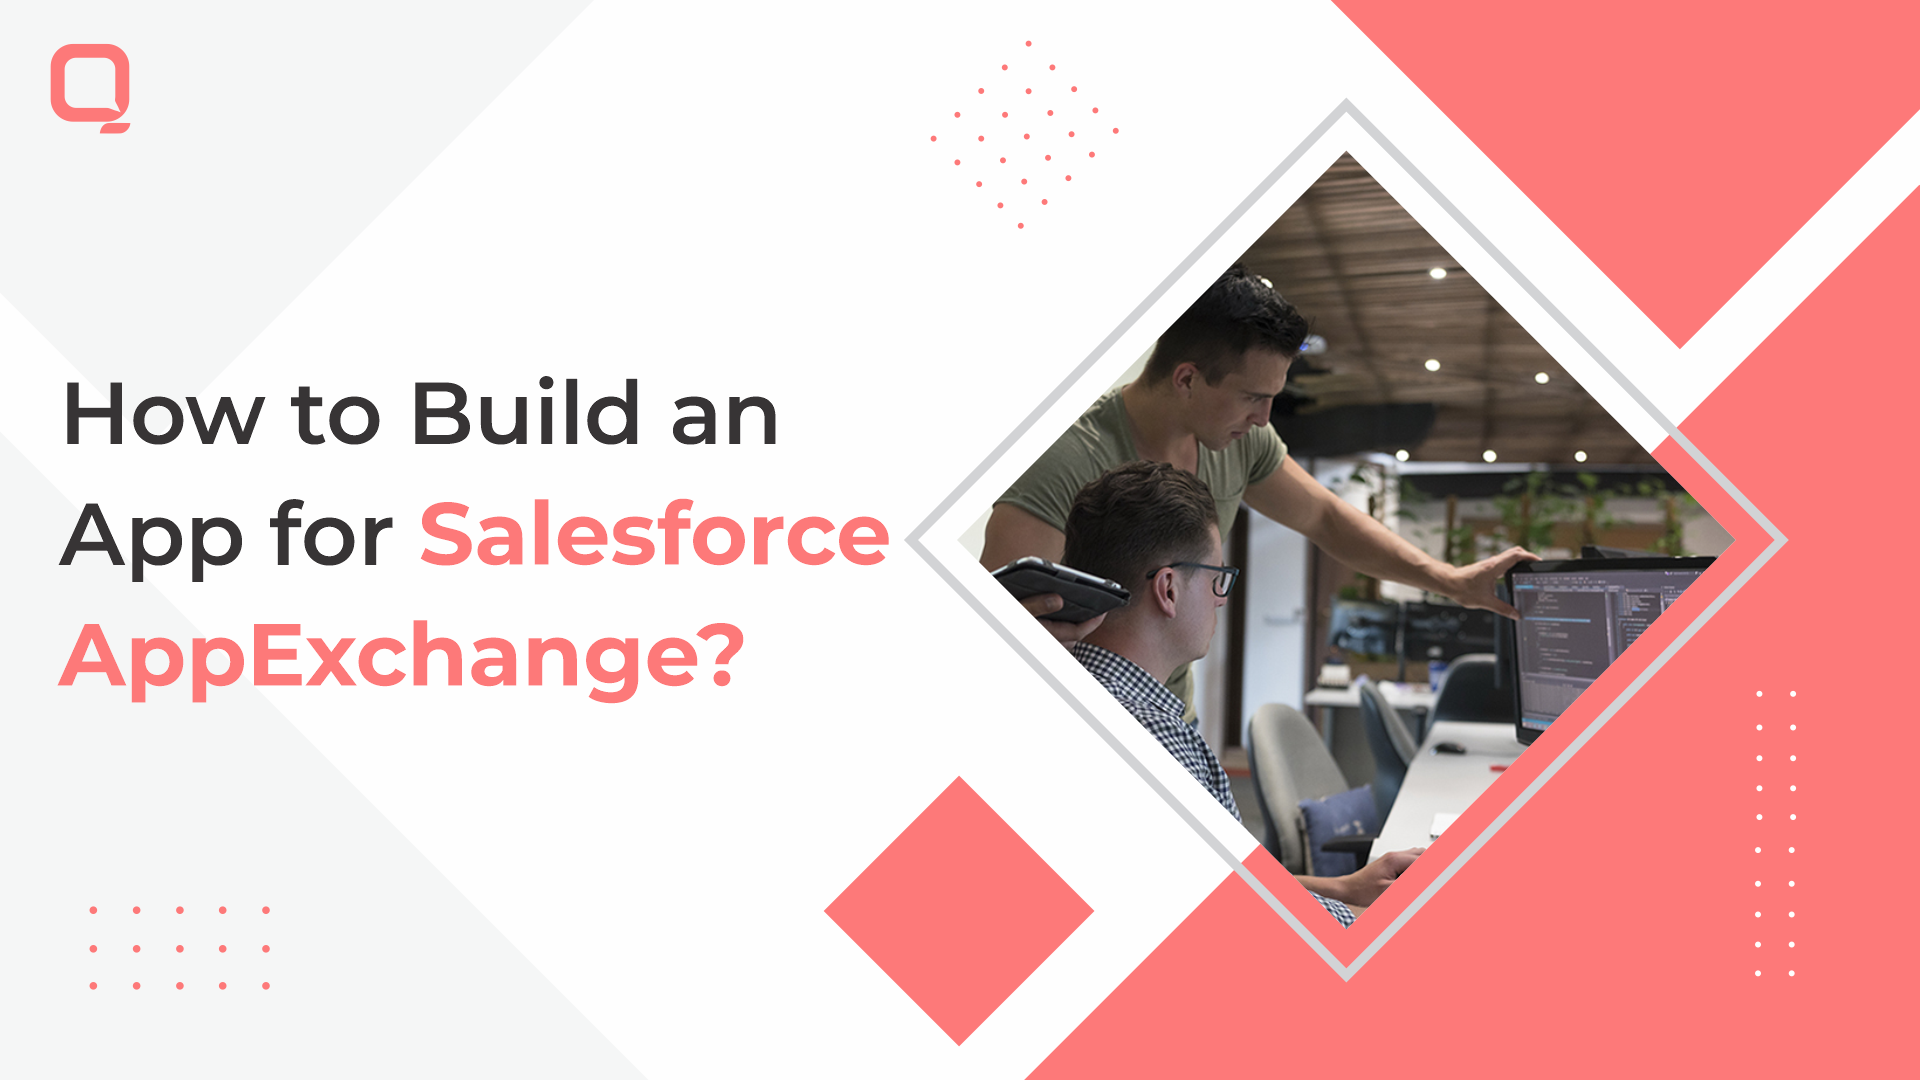 How to Build an App for Salesforce AppExchange